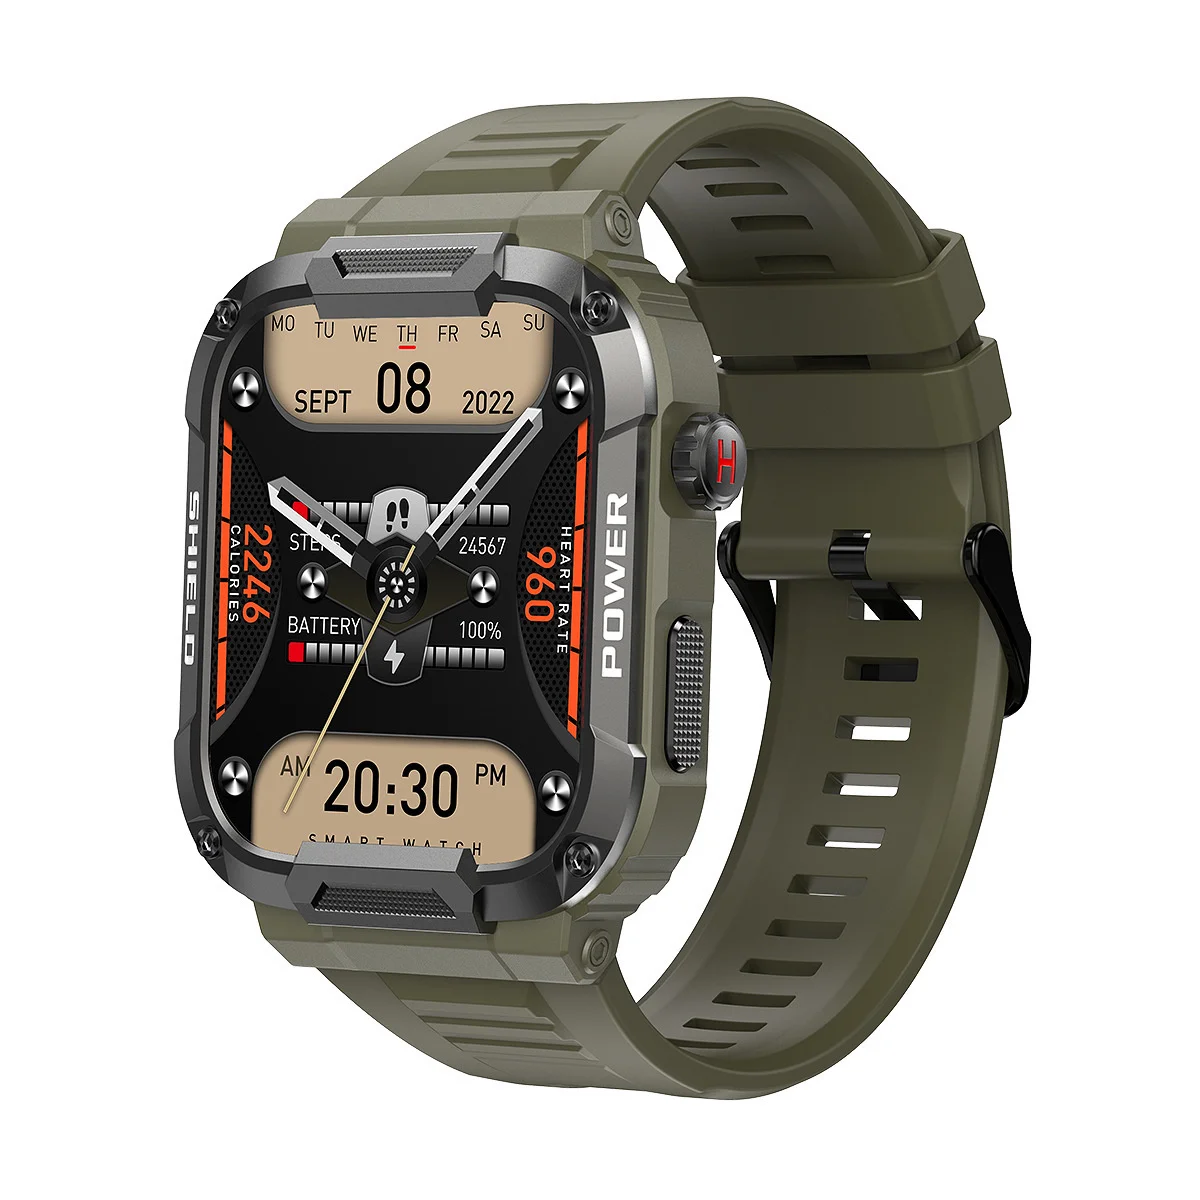 

Men Rugged Military Smart Watch 1.85inch HD Large Screen Ip68 Waterproof Heart Rate Monitoring Bluetooth Call For Android Ios